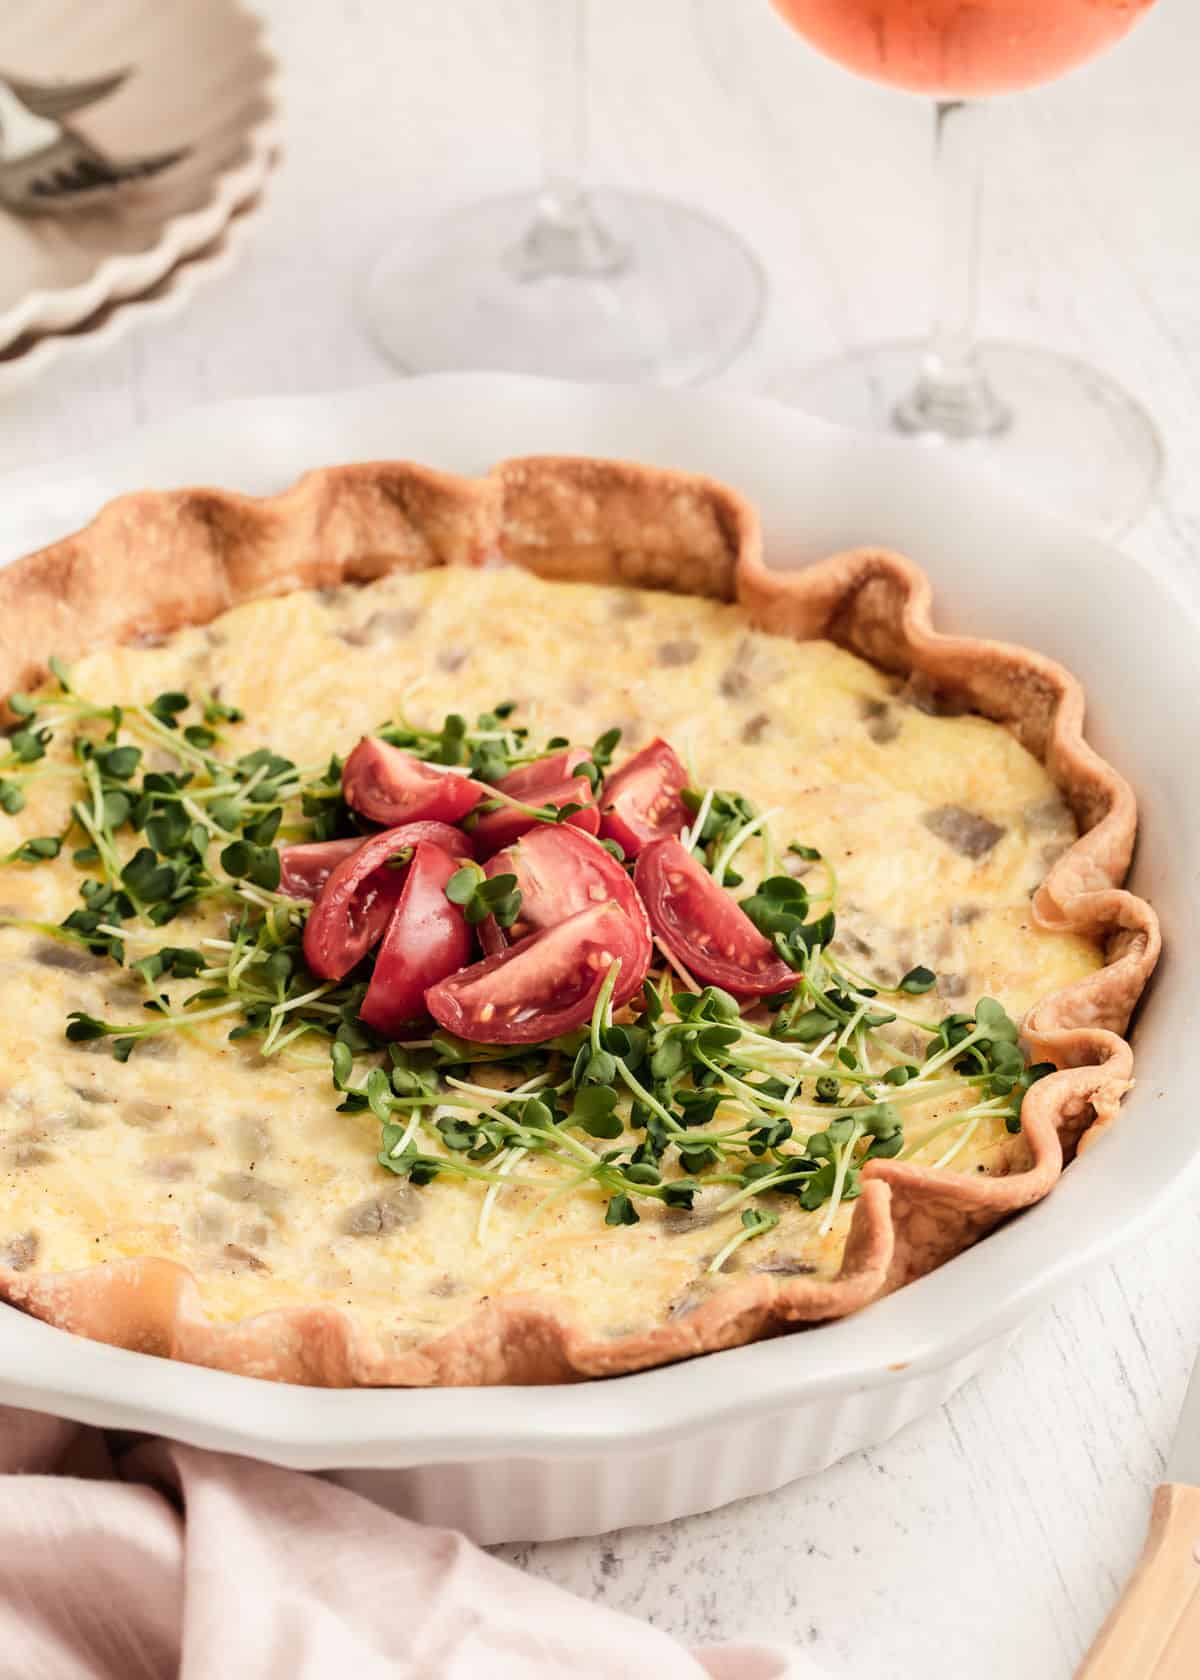 quiche topped with microgreens and cut tomatoes, in white dish sitting on white table with stem glass in the background.